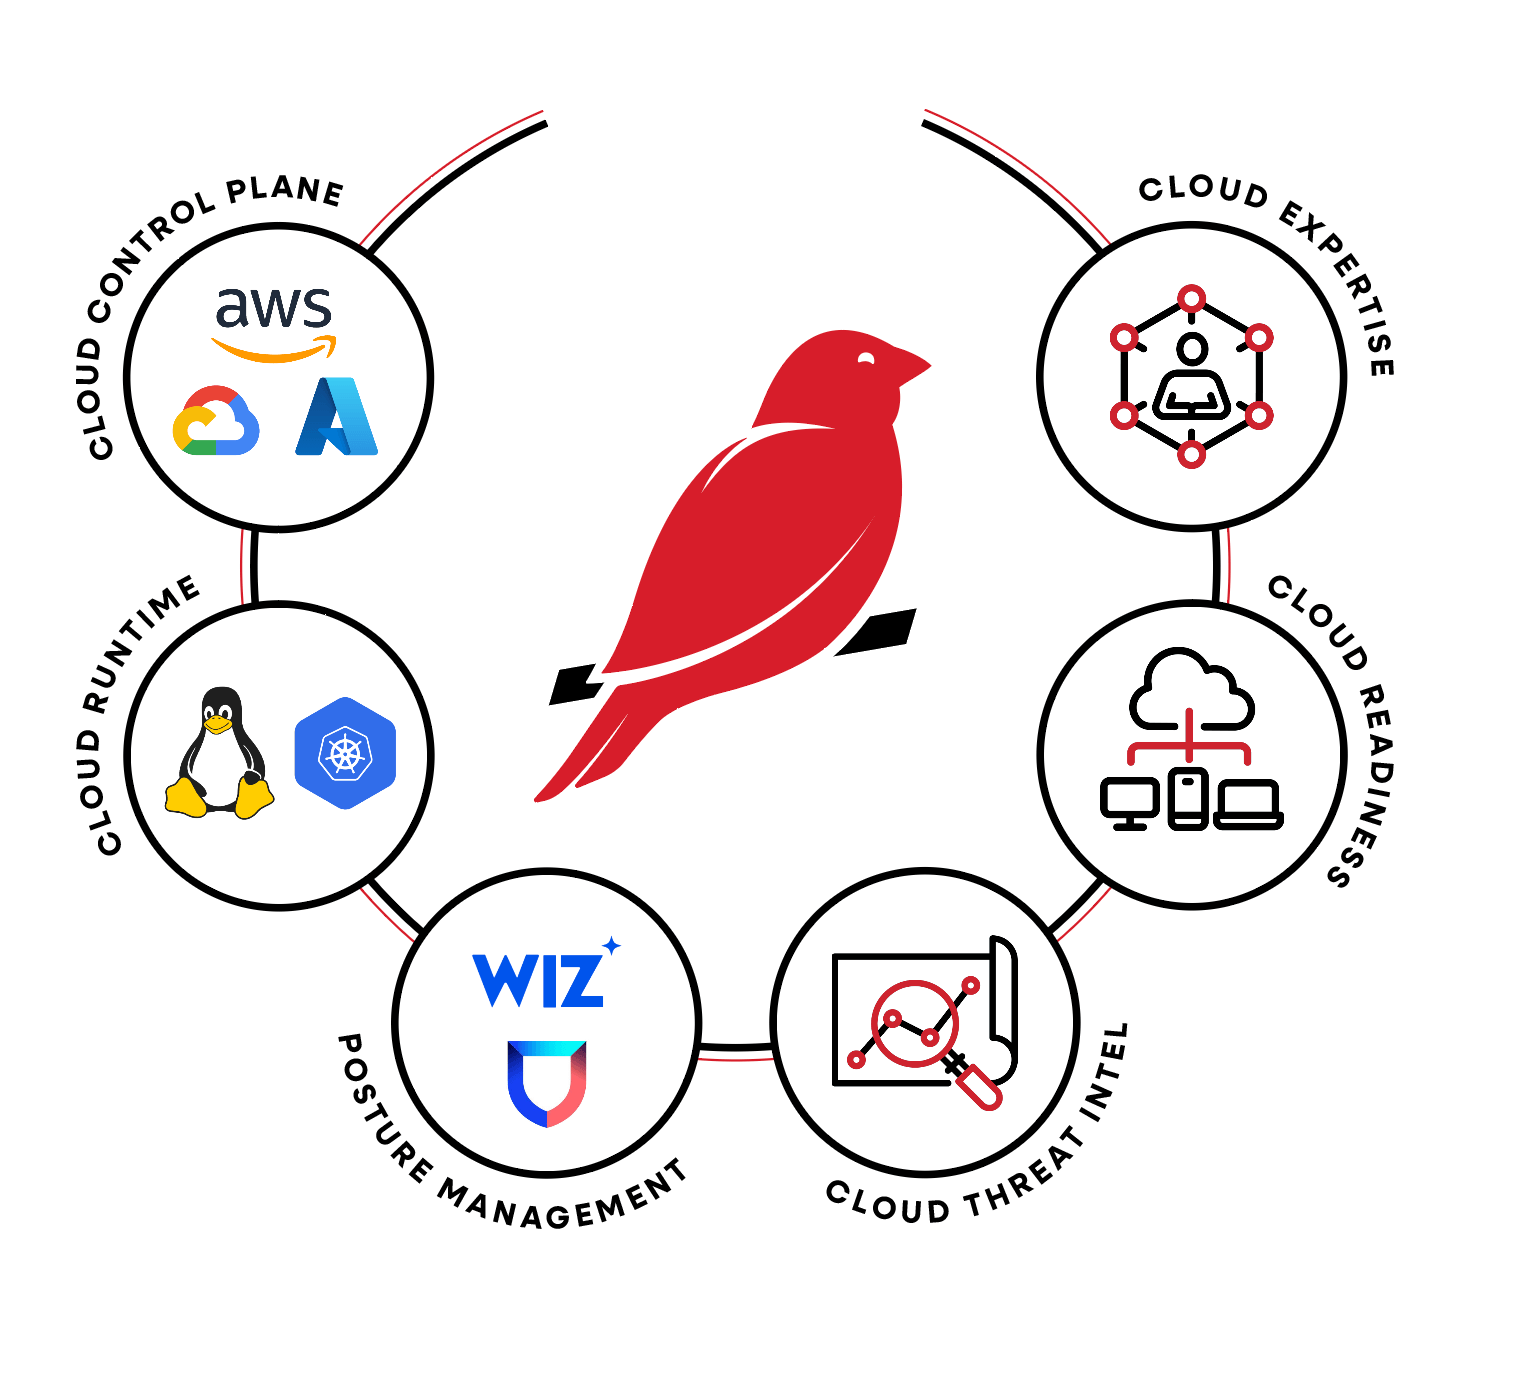 Red Canary offers full coverage for all major cloud service providers